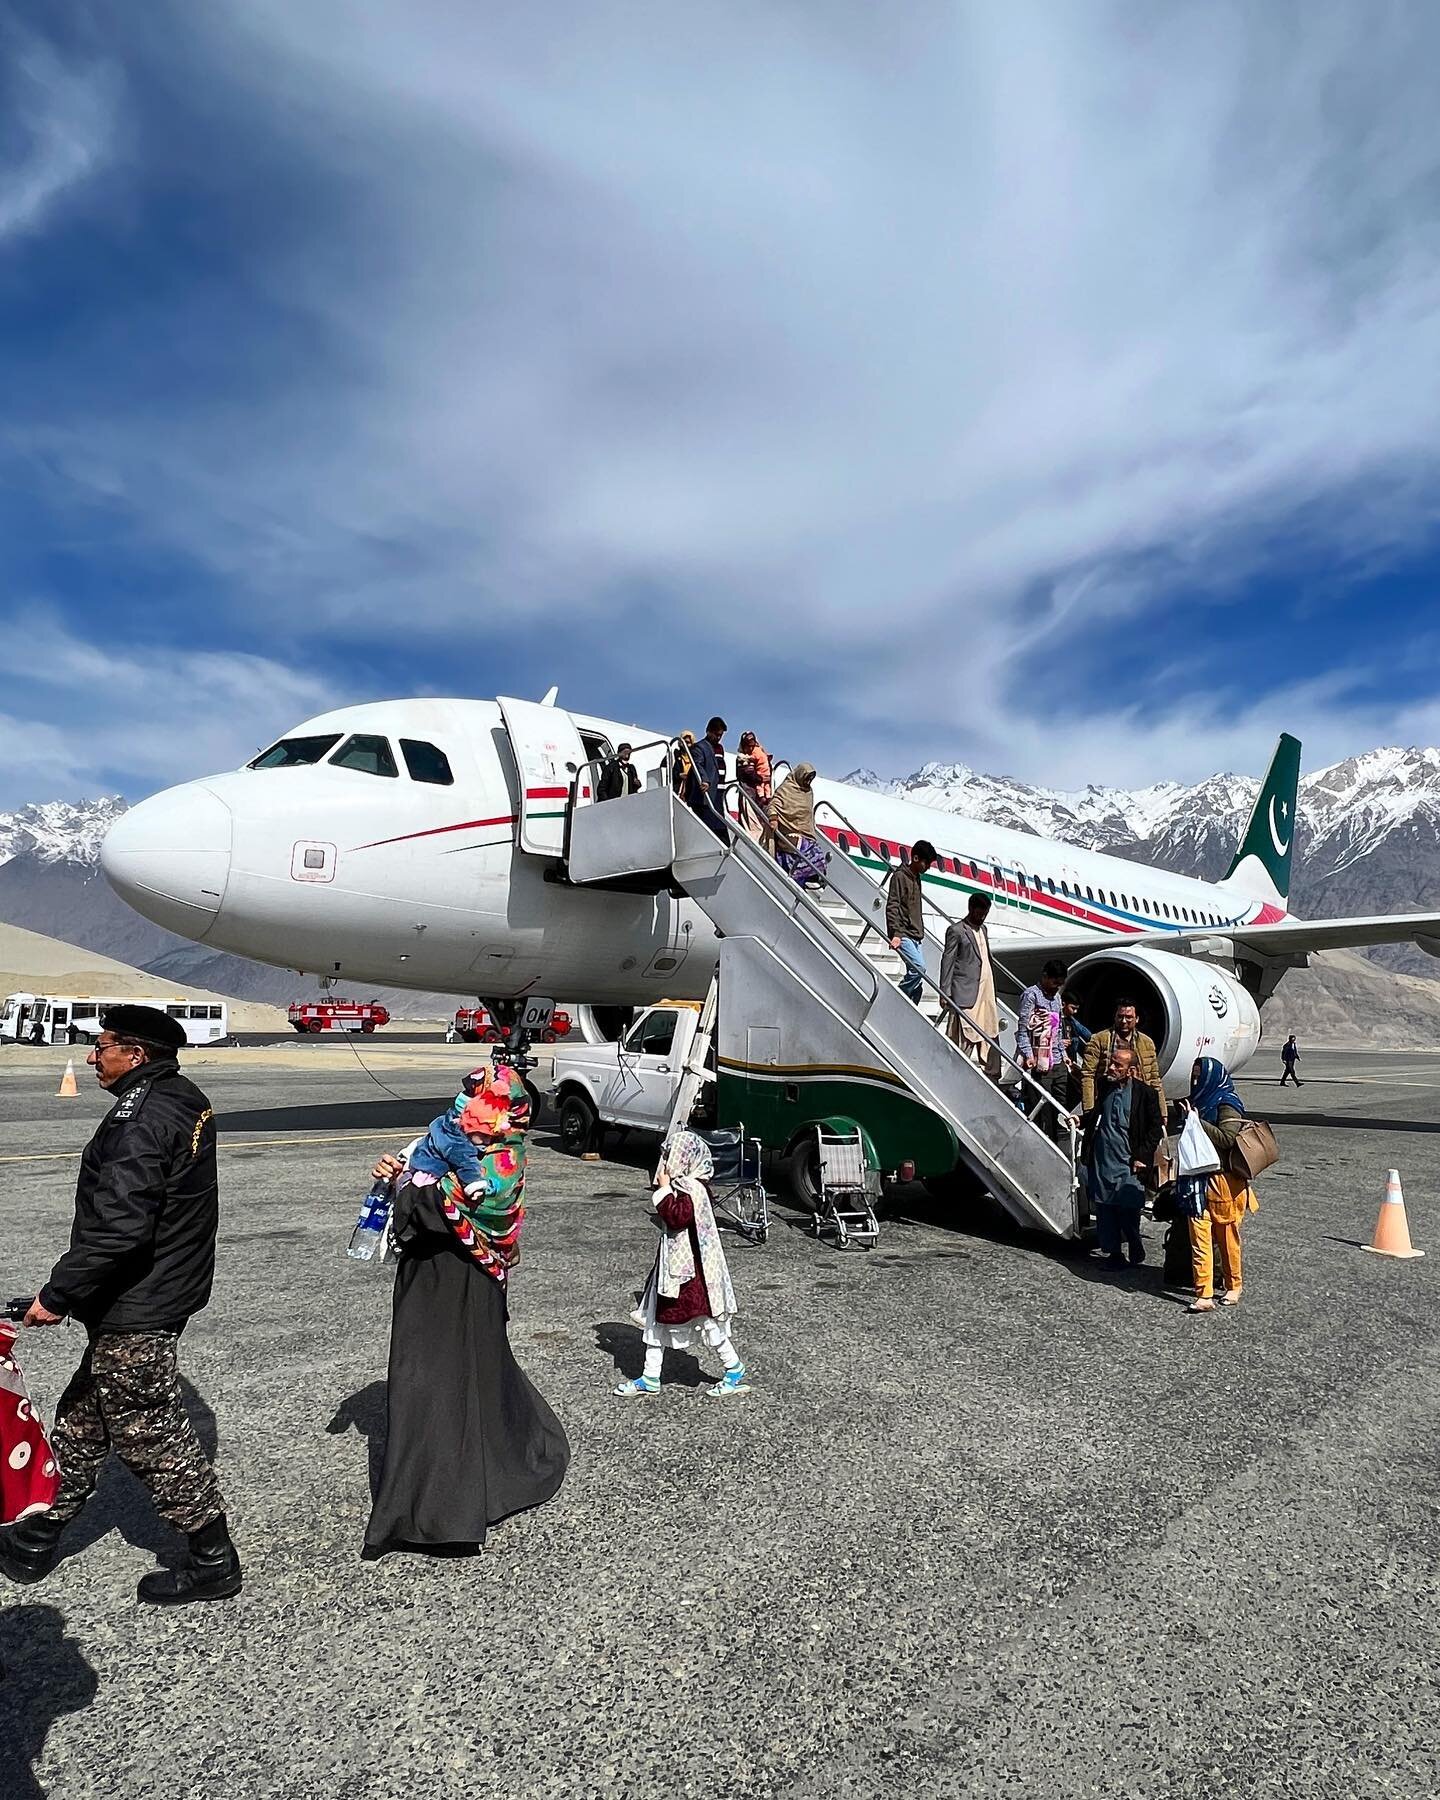 Well, let&rsquo;s chalk that down as another &lsquo;once in a lifetime experience&rsquo;. Flying to the breathtaking airport of Skardu, high in the Himalayas in a valley. You have to make a circling approach and landing into the valley and it can onl